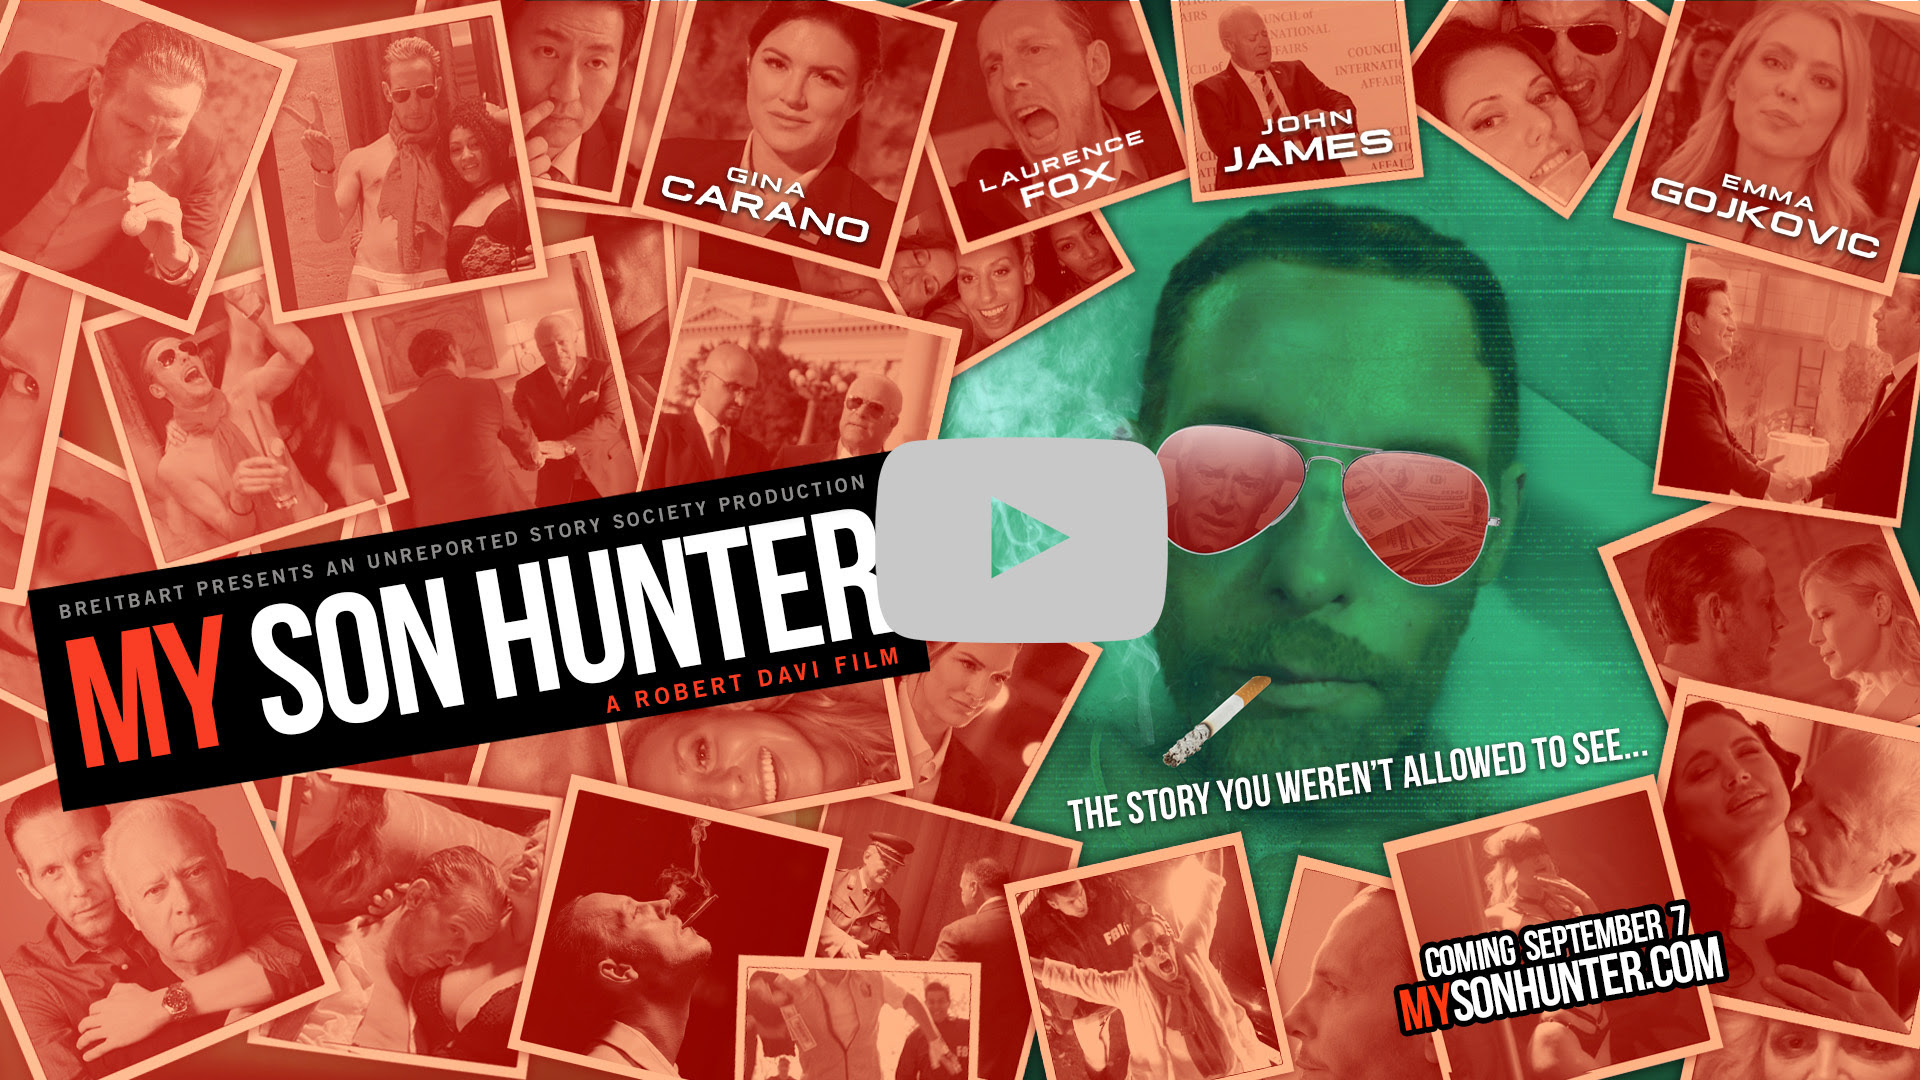 Have you seen the trailer for My Son Hunter?